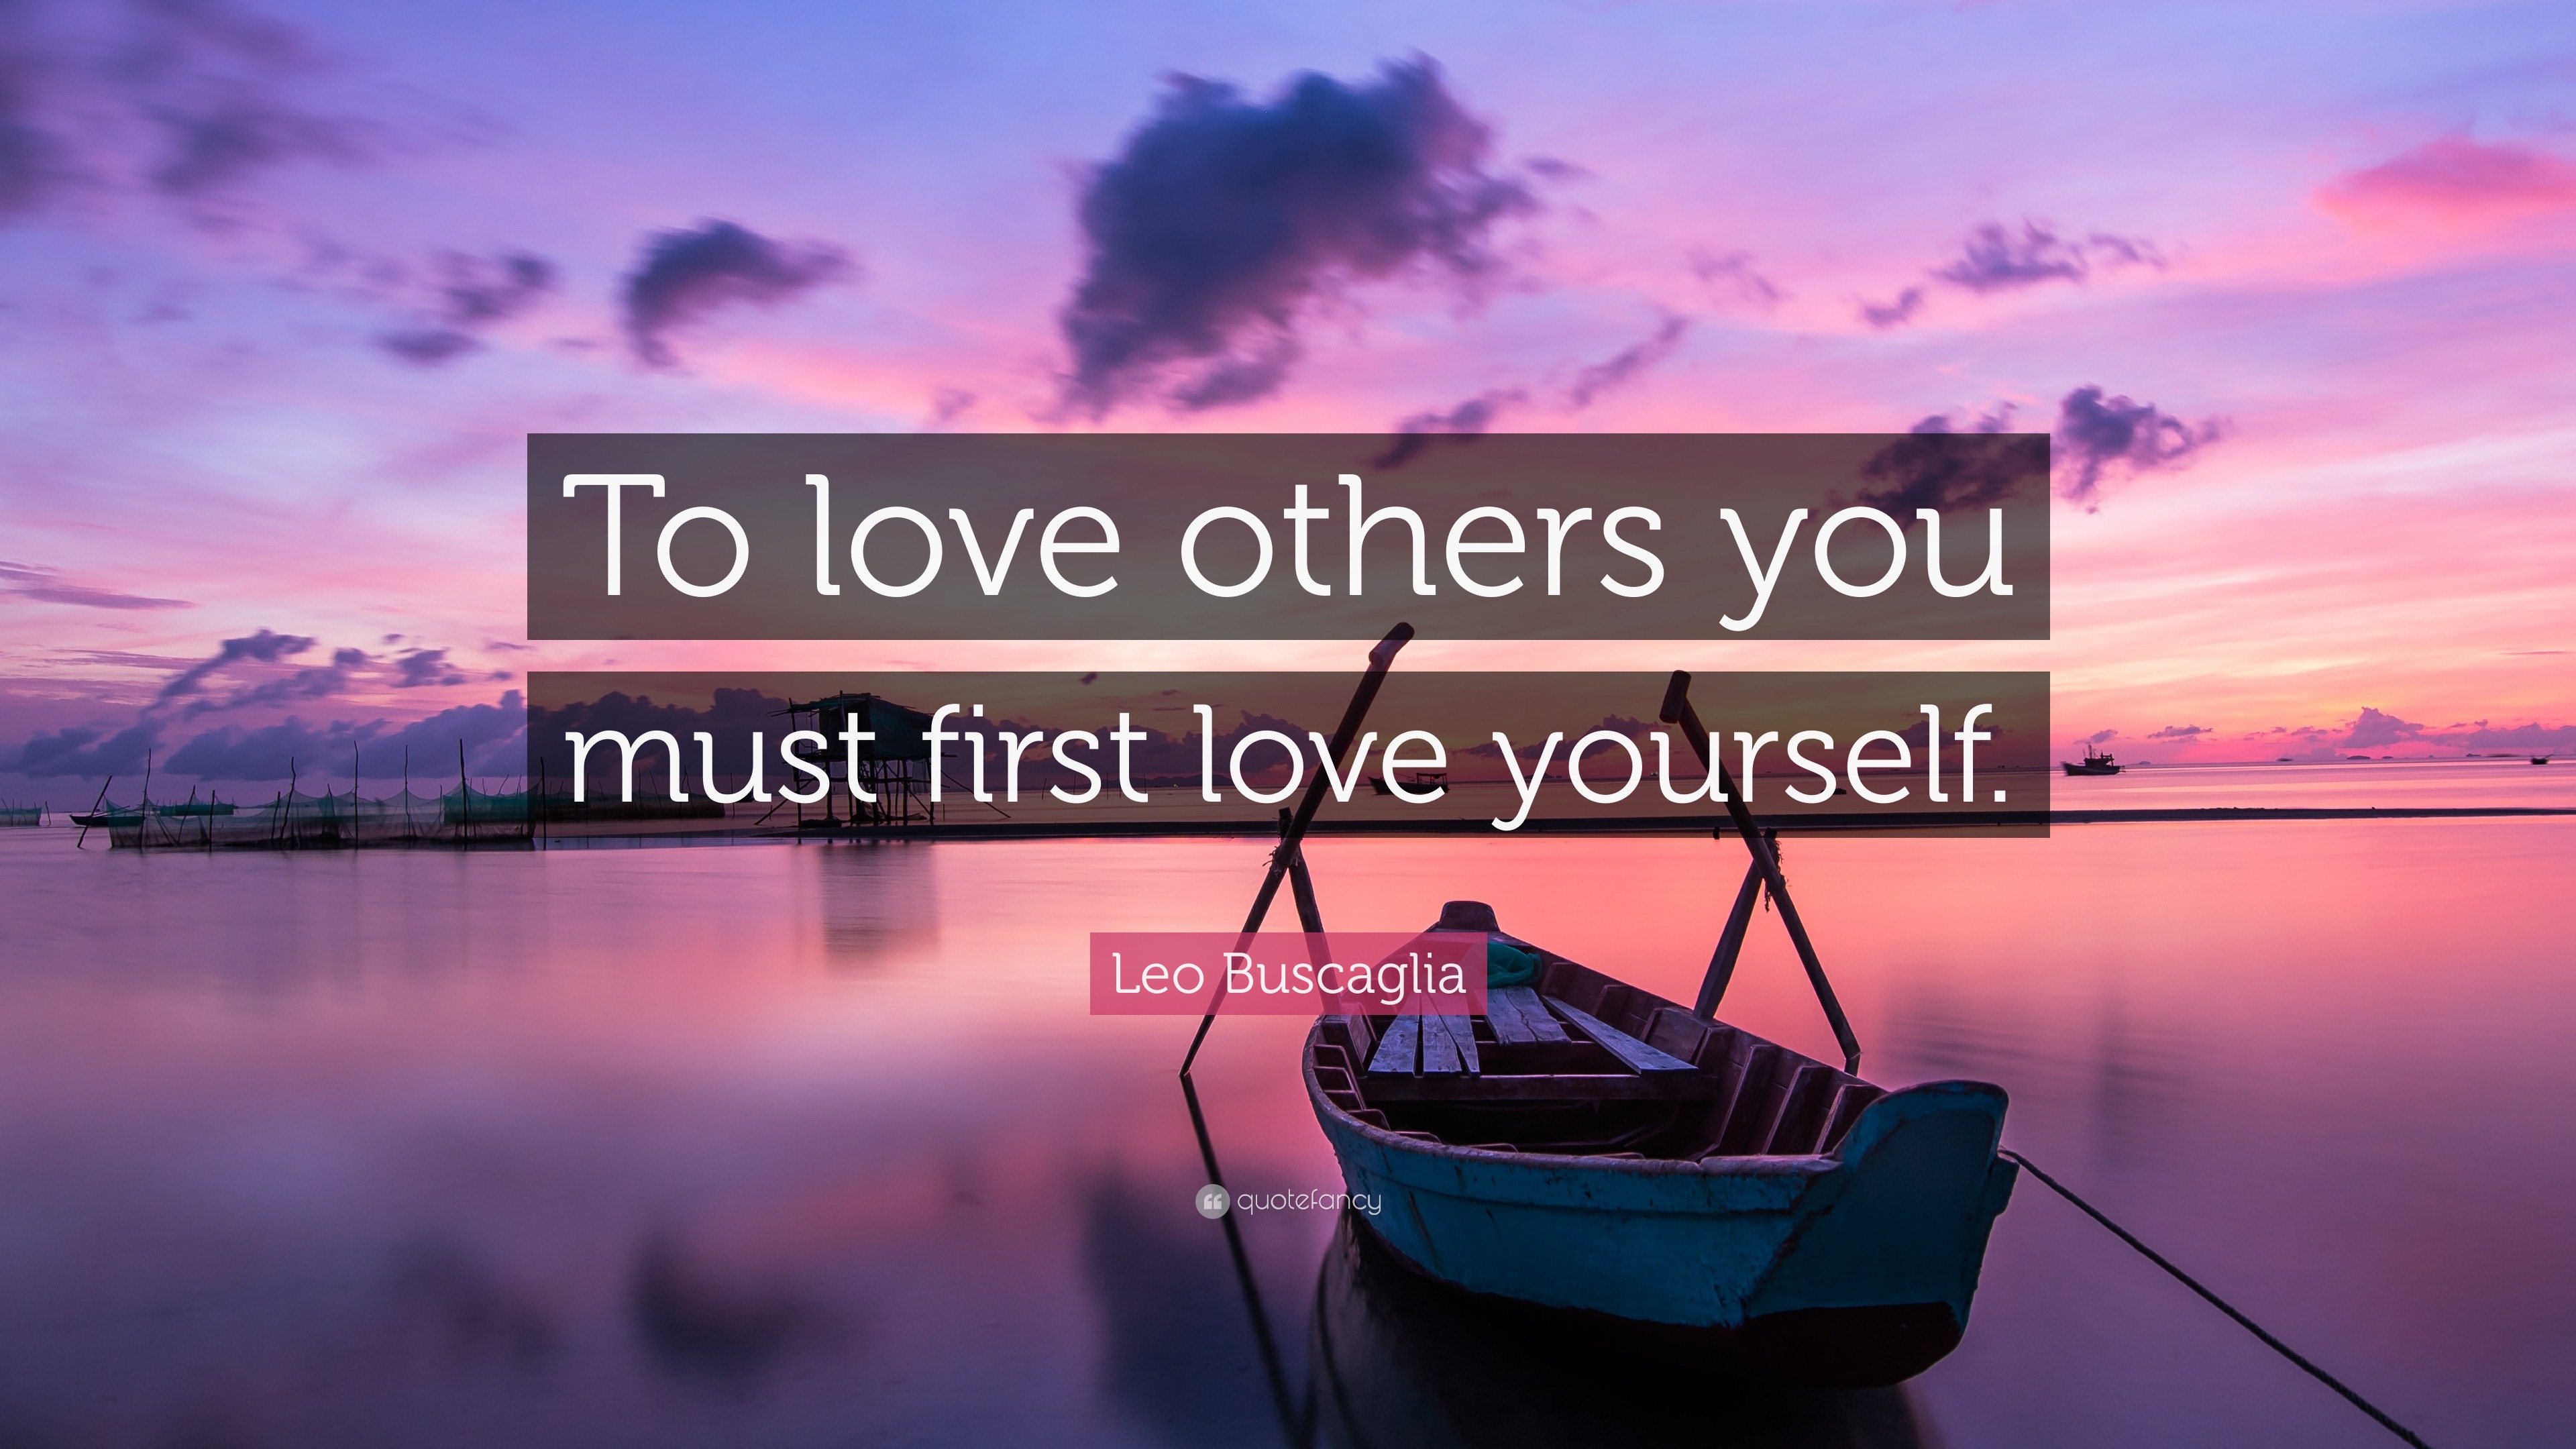 Leo Buscaglia Quote: “To love others you must first love yourself.” (12